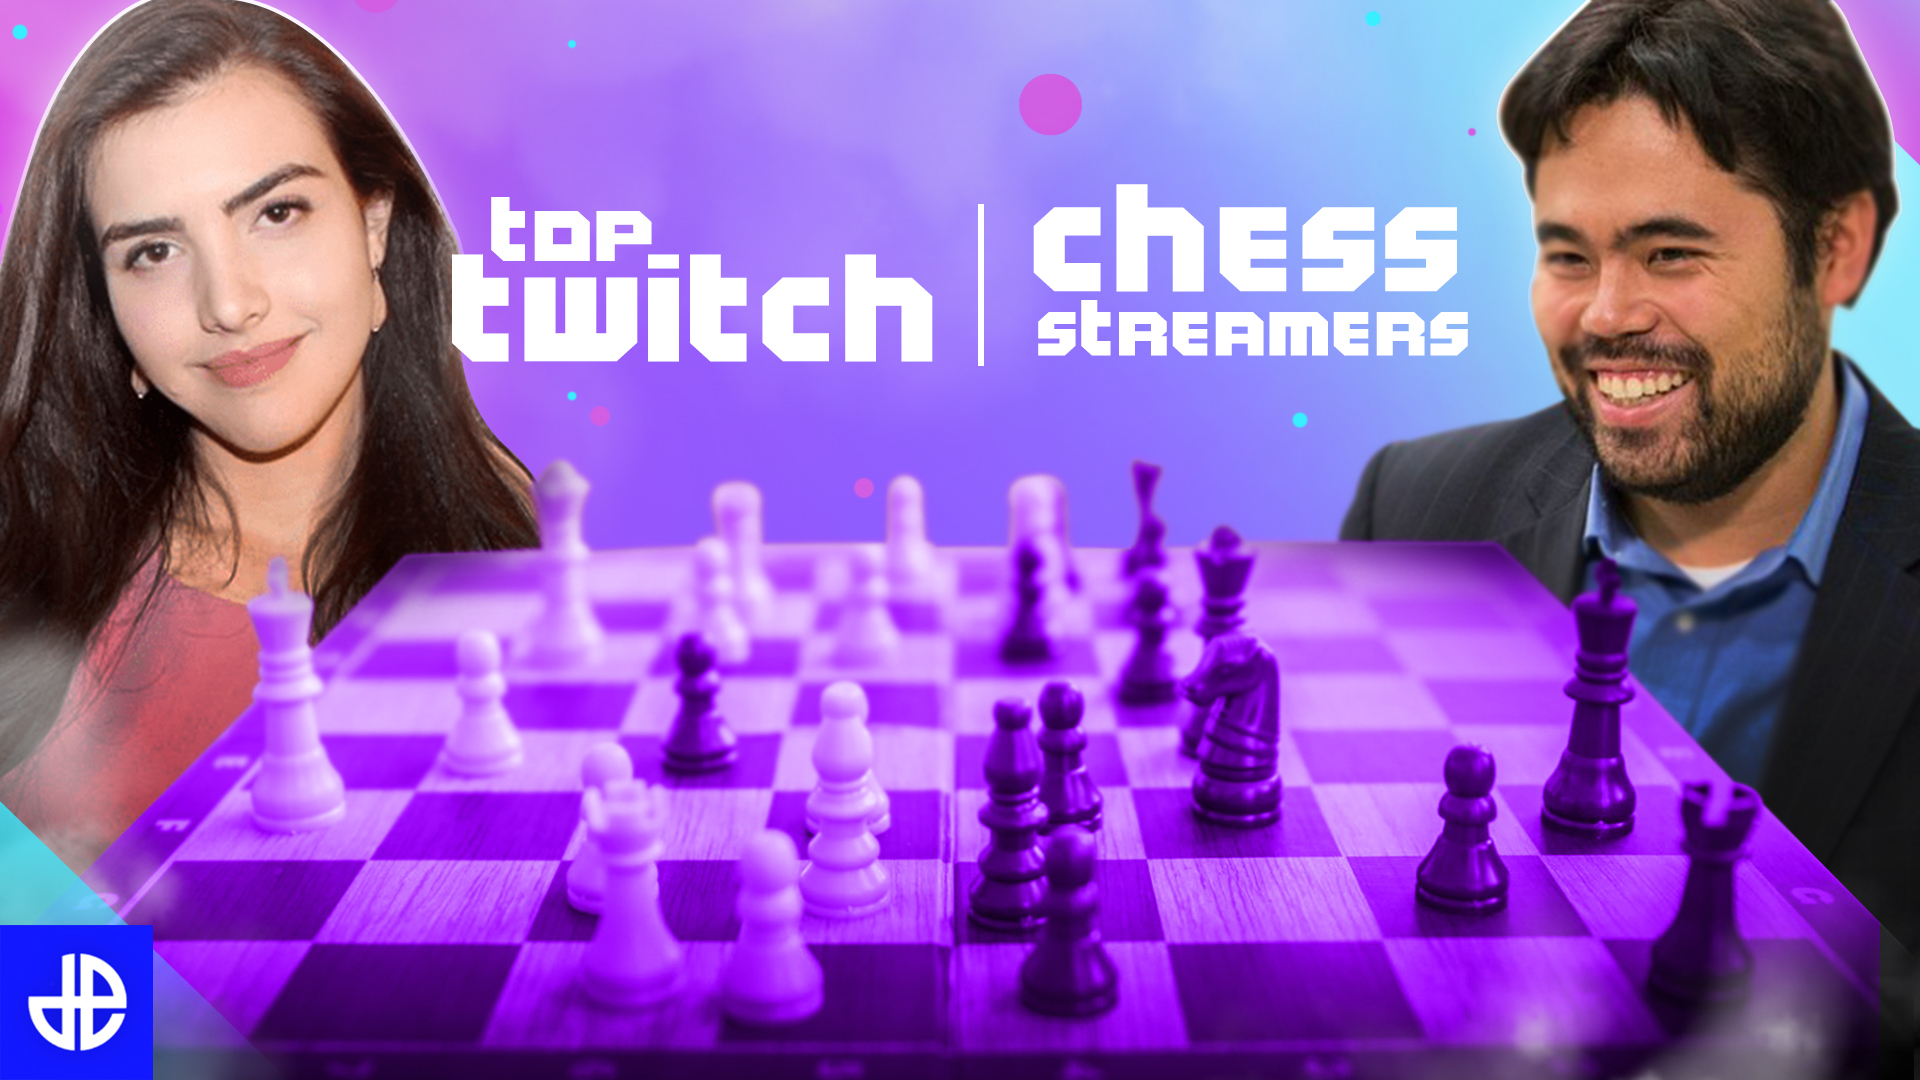 Twitch Rivals Hand and Brain. Today at 12PM PT : r/chess